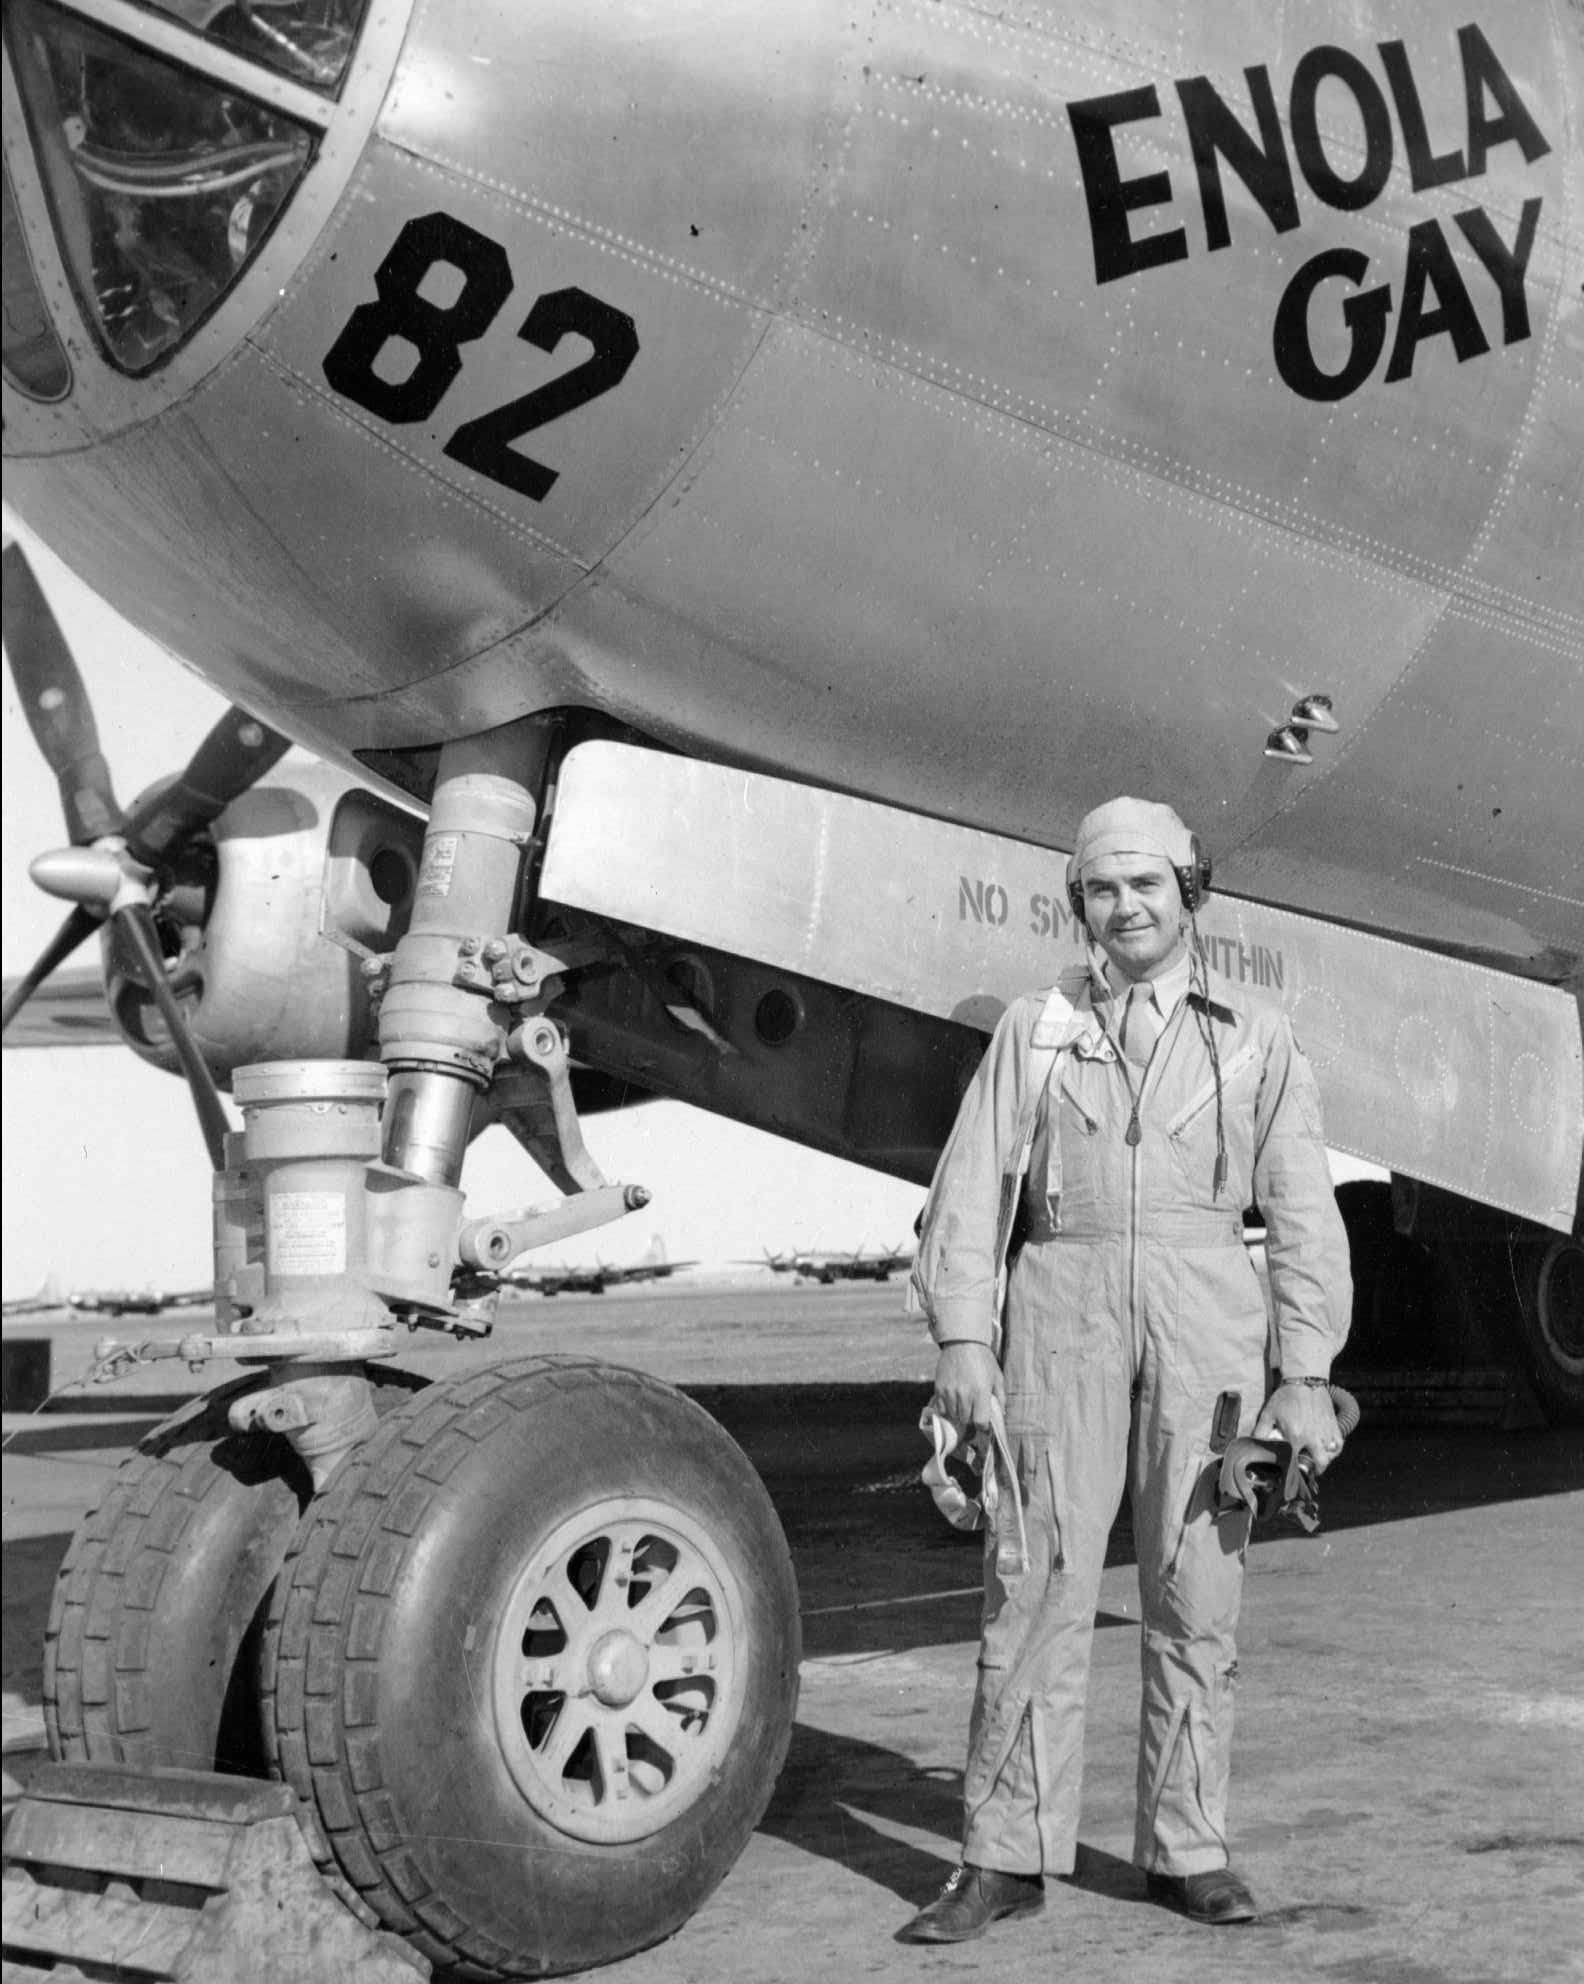 who was on the enola gay